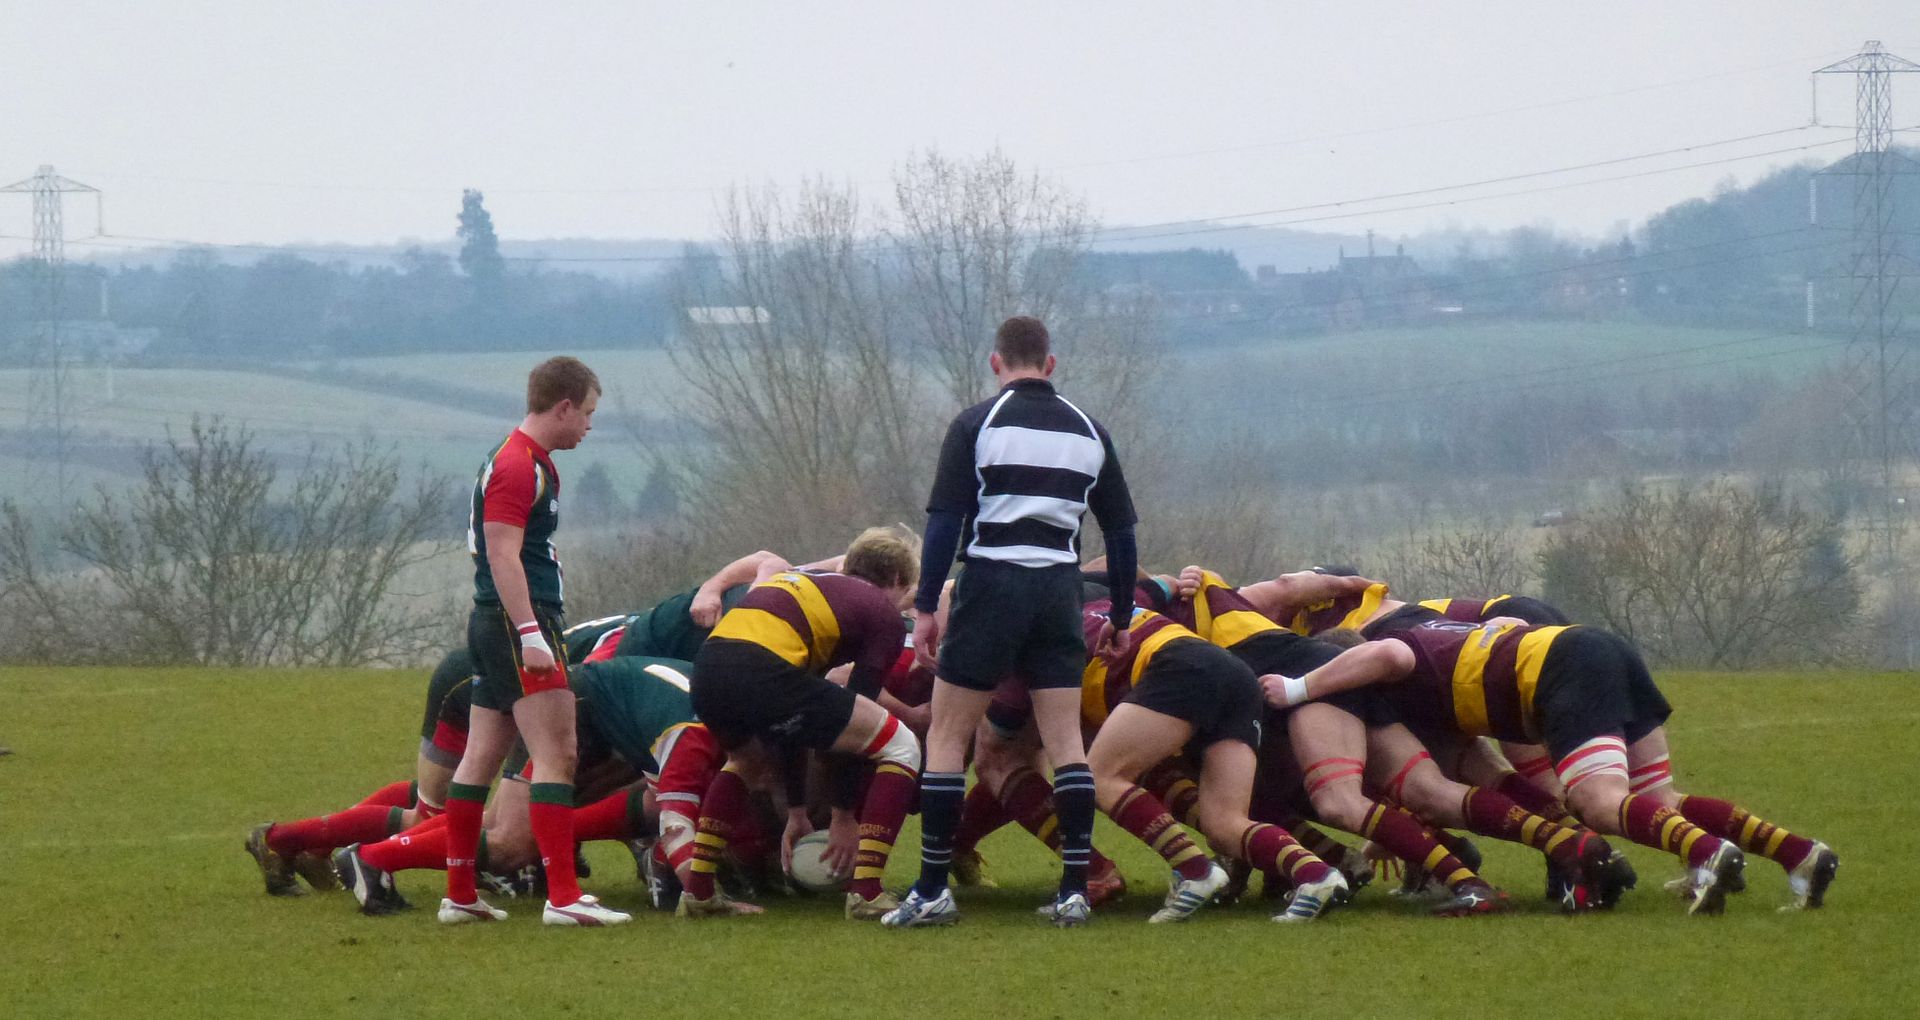 Scrum on a Hill